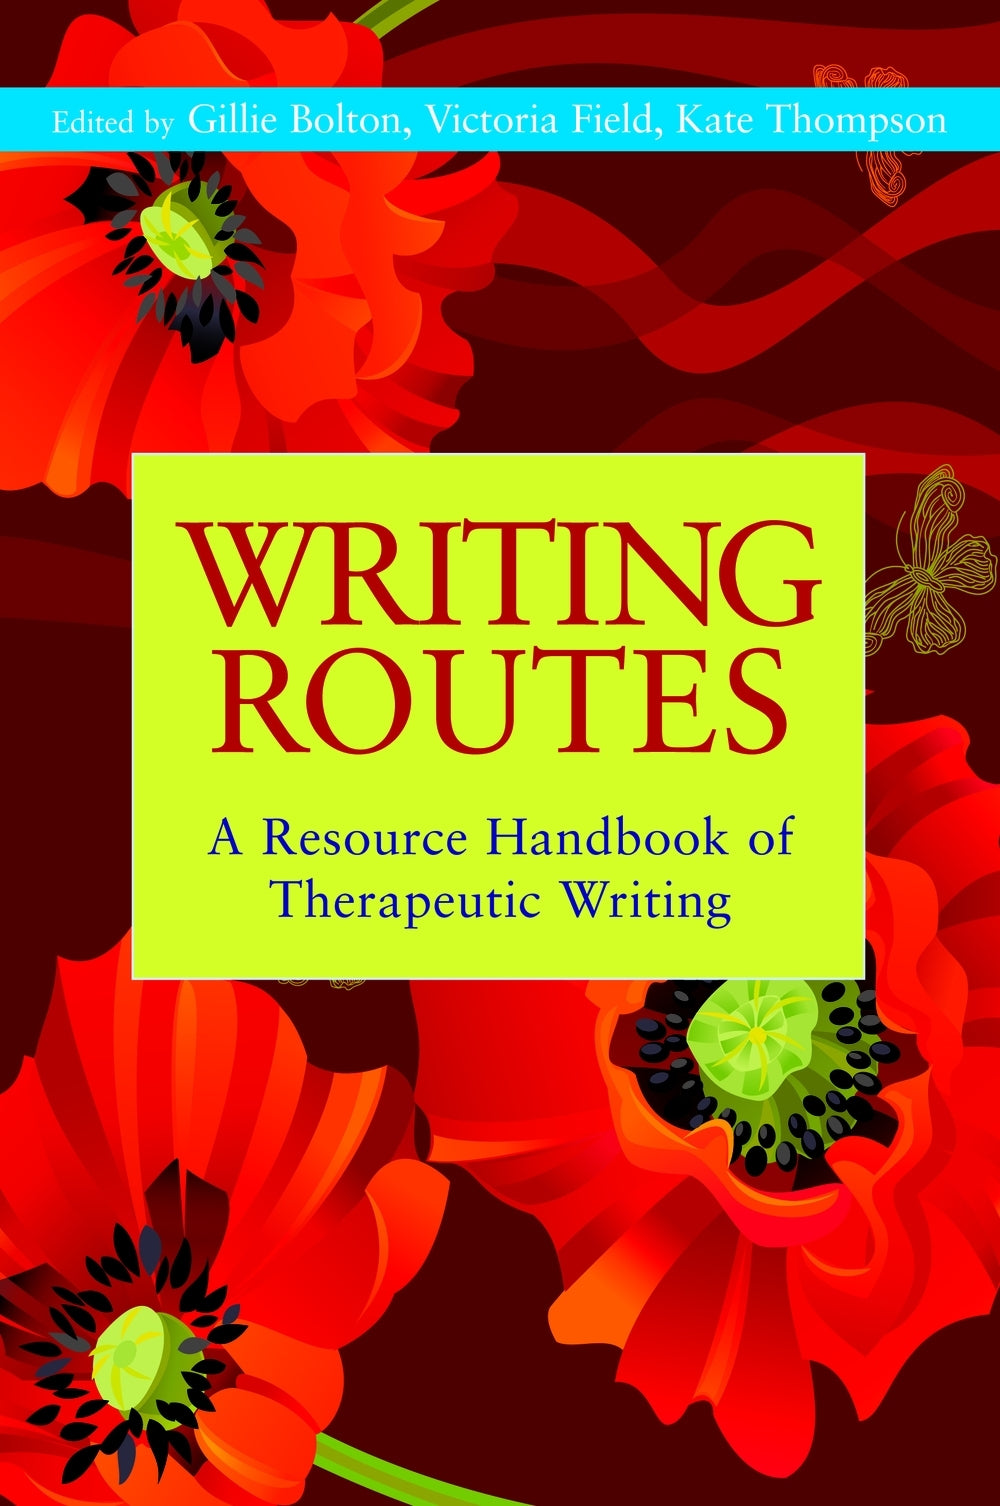 Writing Routes by No Author Listed, Gillie Bolton, Kate Thompson, Victoria Field, Gwyneth Lewis